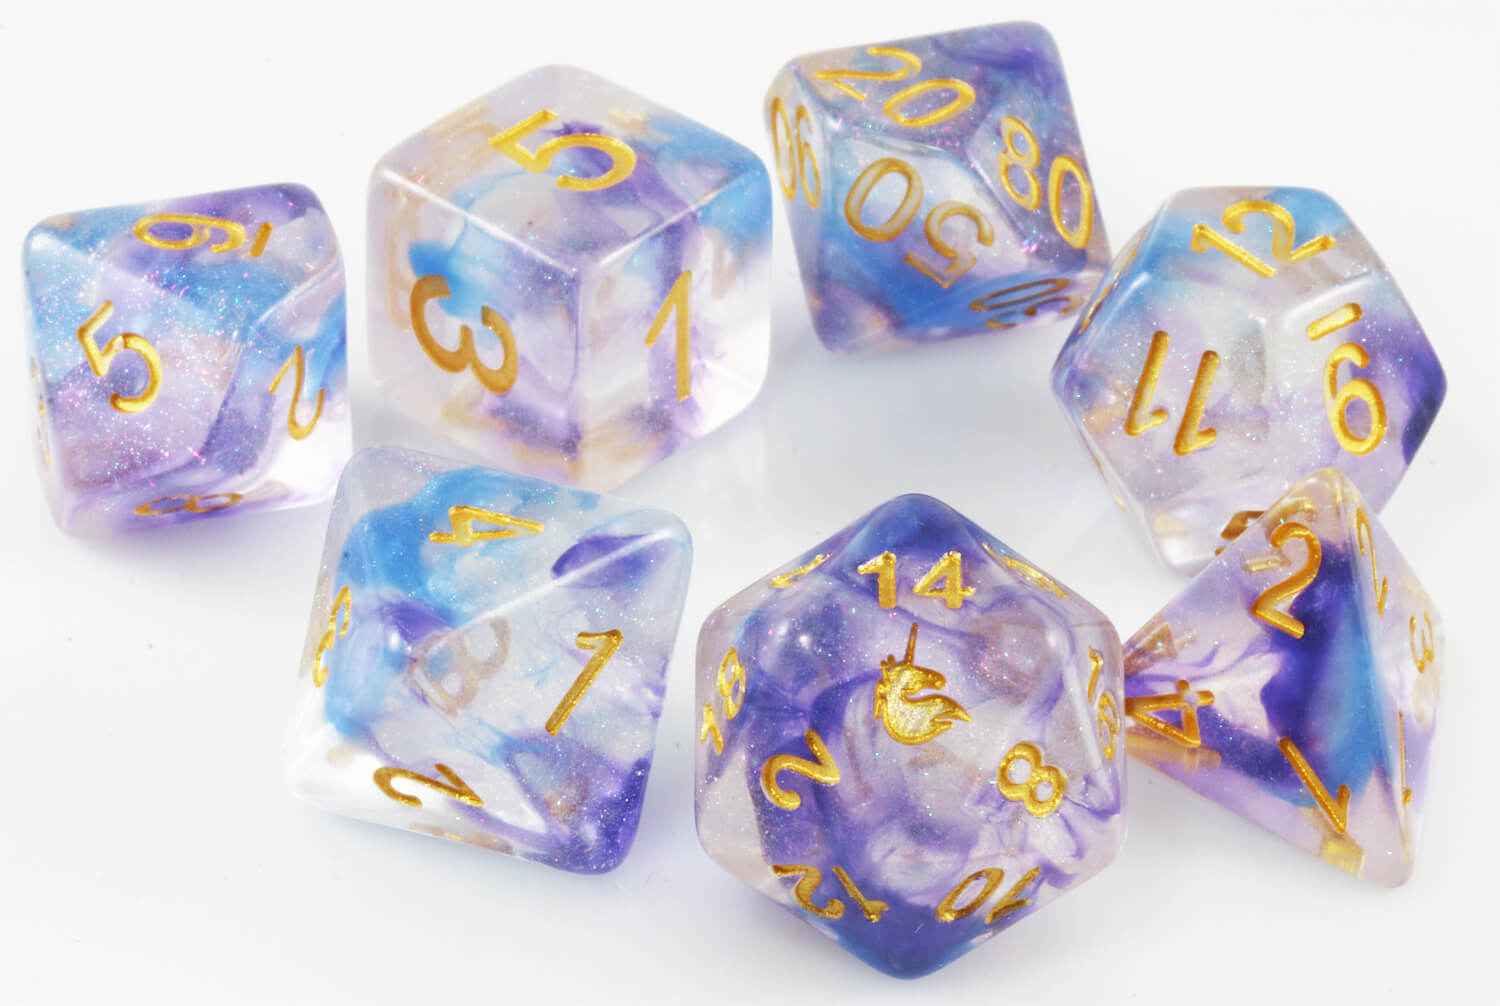 Unicorn Dice (Midnight Fantasy) RPG Role Playing Game Dice Set